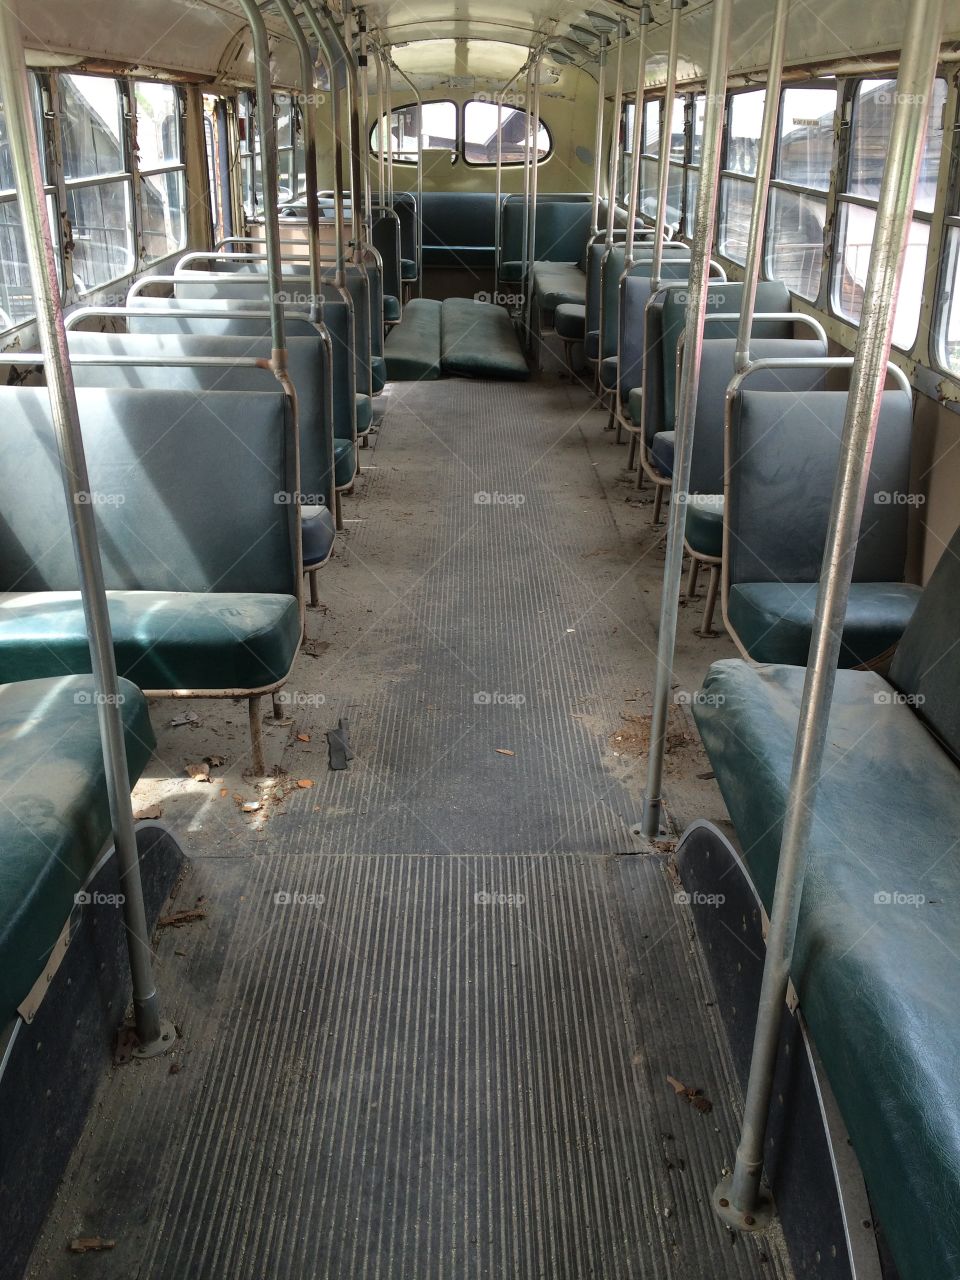 Inside a historic old city bus. 